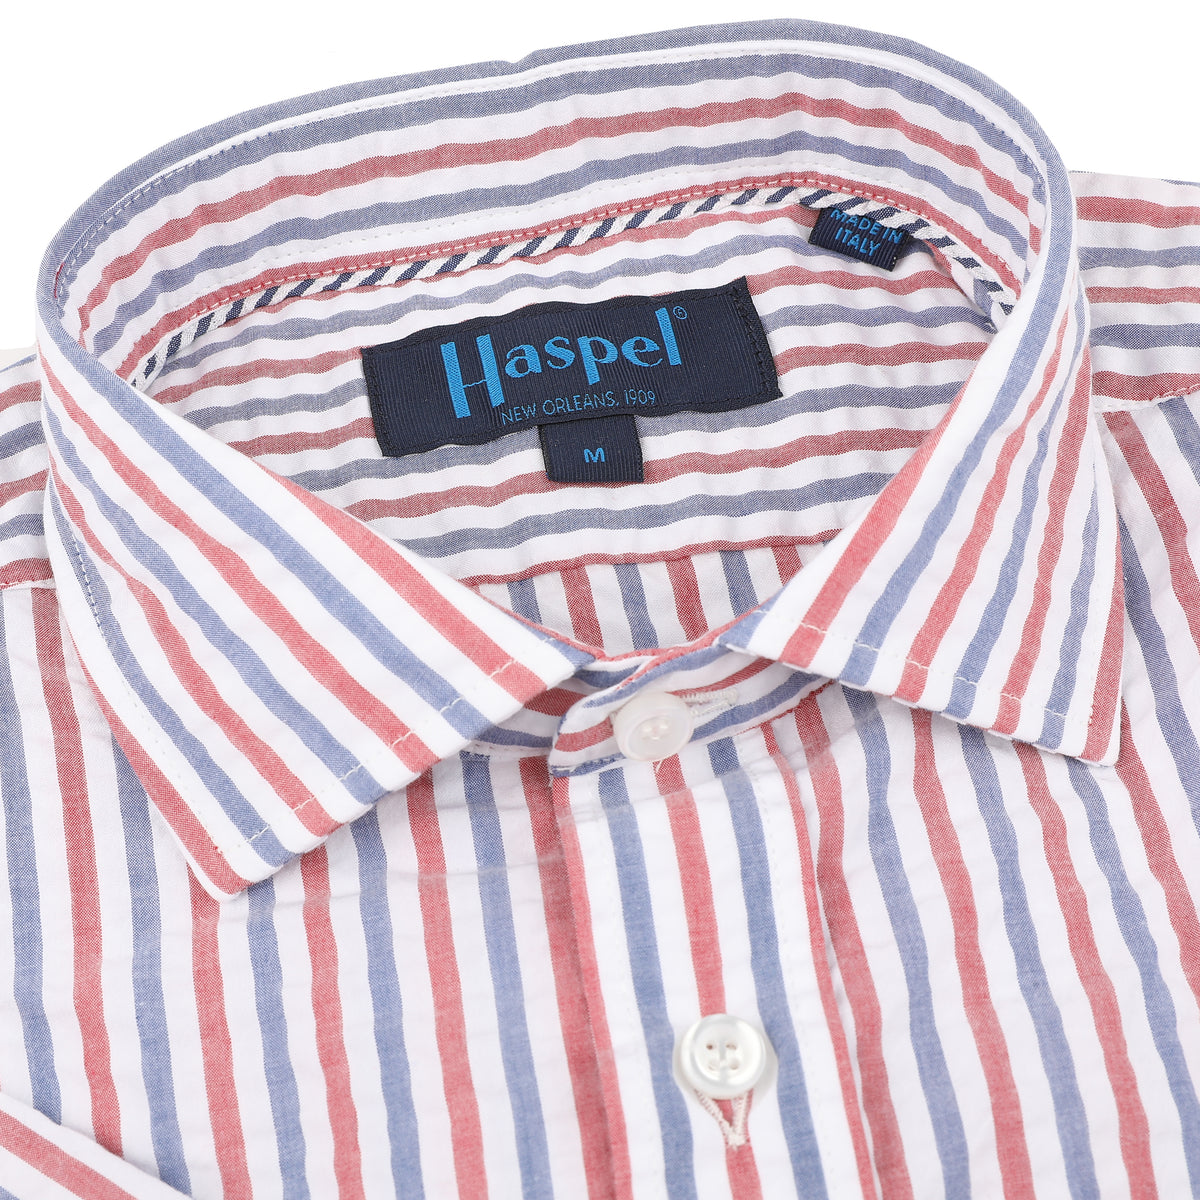 Add some seaside flair to your wardrobe with Baonne&#39;s Red, White and Blue Seersucker Stripe look. The classic casual style is elevated by the playful red and blue stripes, making it a must-have for any occasion.&amp;nbsp;&lt;/p&gt; &lt;p&gt;100% Cotton Seersucker • Spread Collar • Long Sleeve • Double Chest Pocket • Machine Washable • Made in Italy